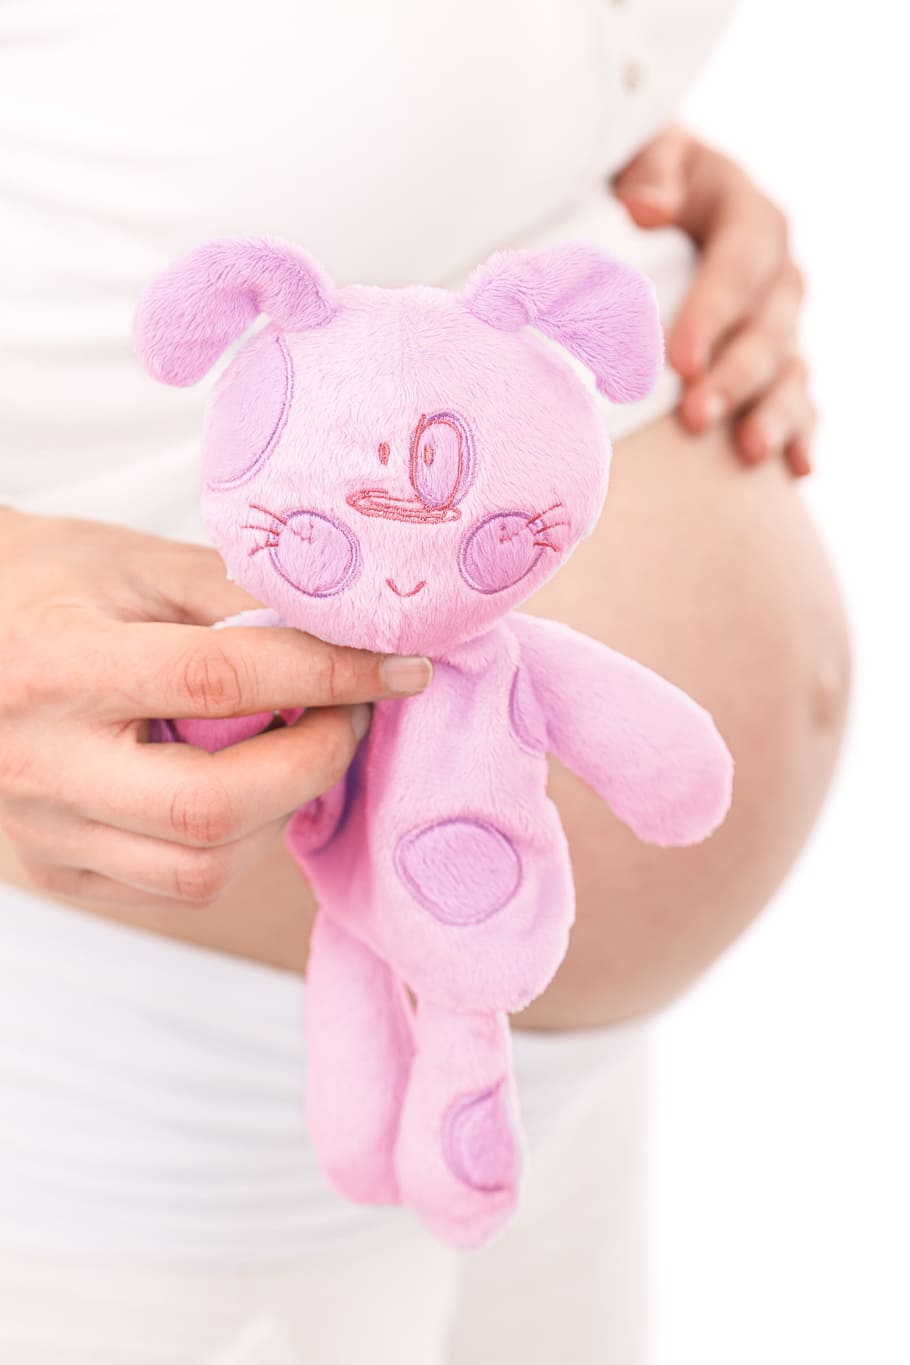 person, holding, pink, plush, toy, plush toy, awaiting, baby, belly, girl